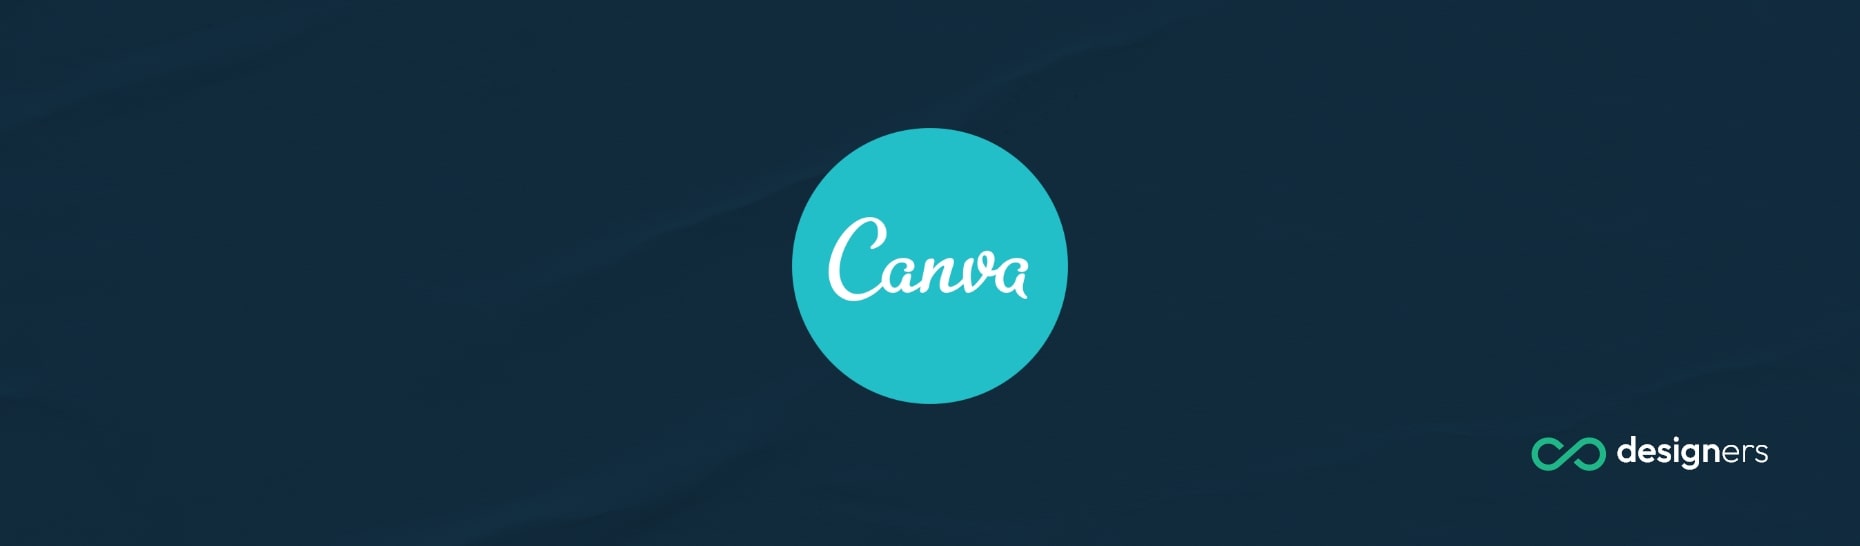 Can I Download Font From Canva?